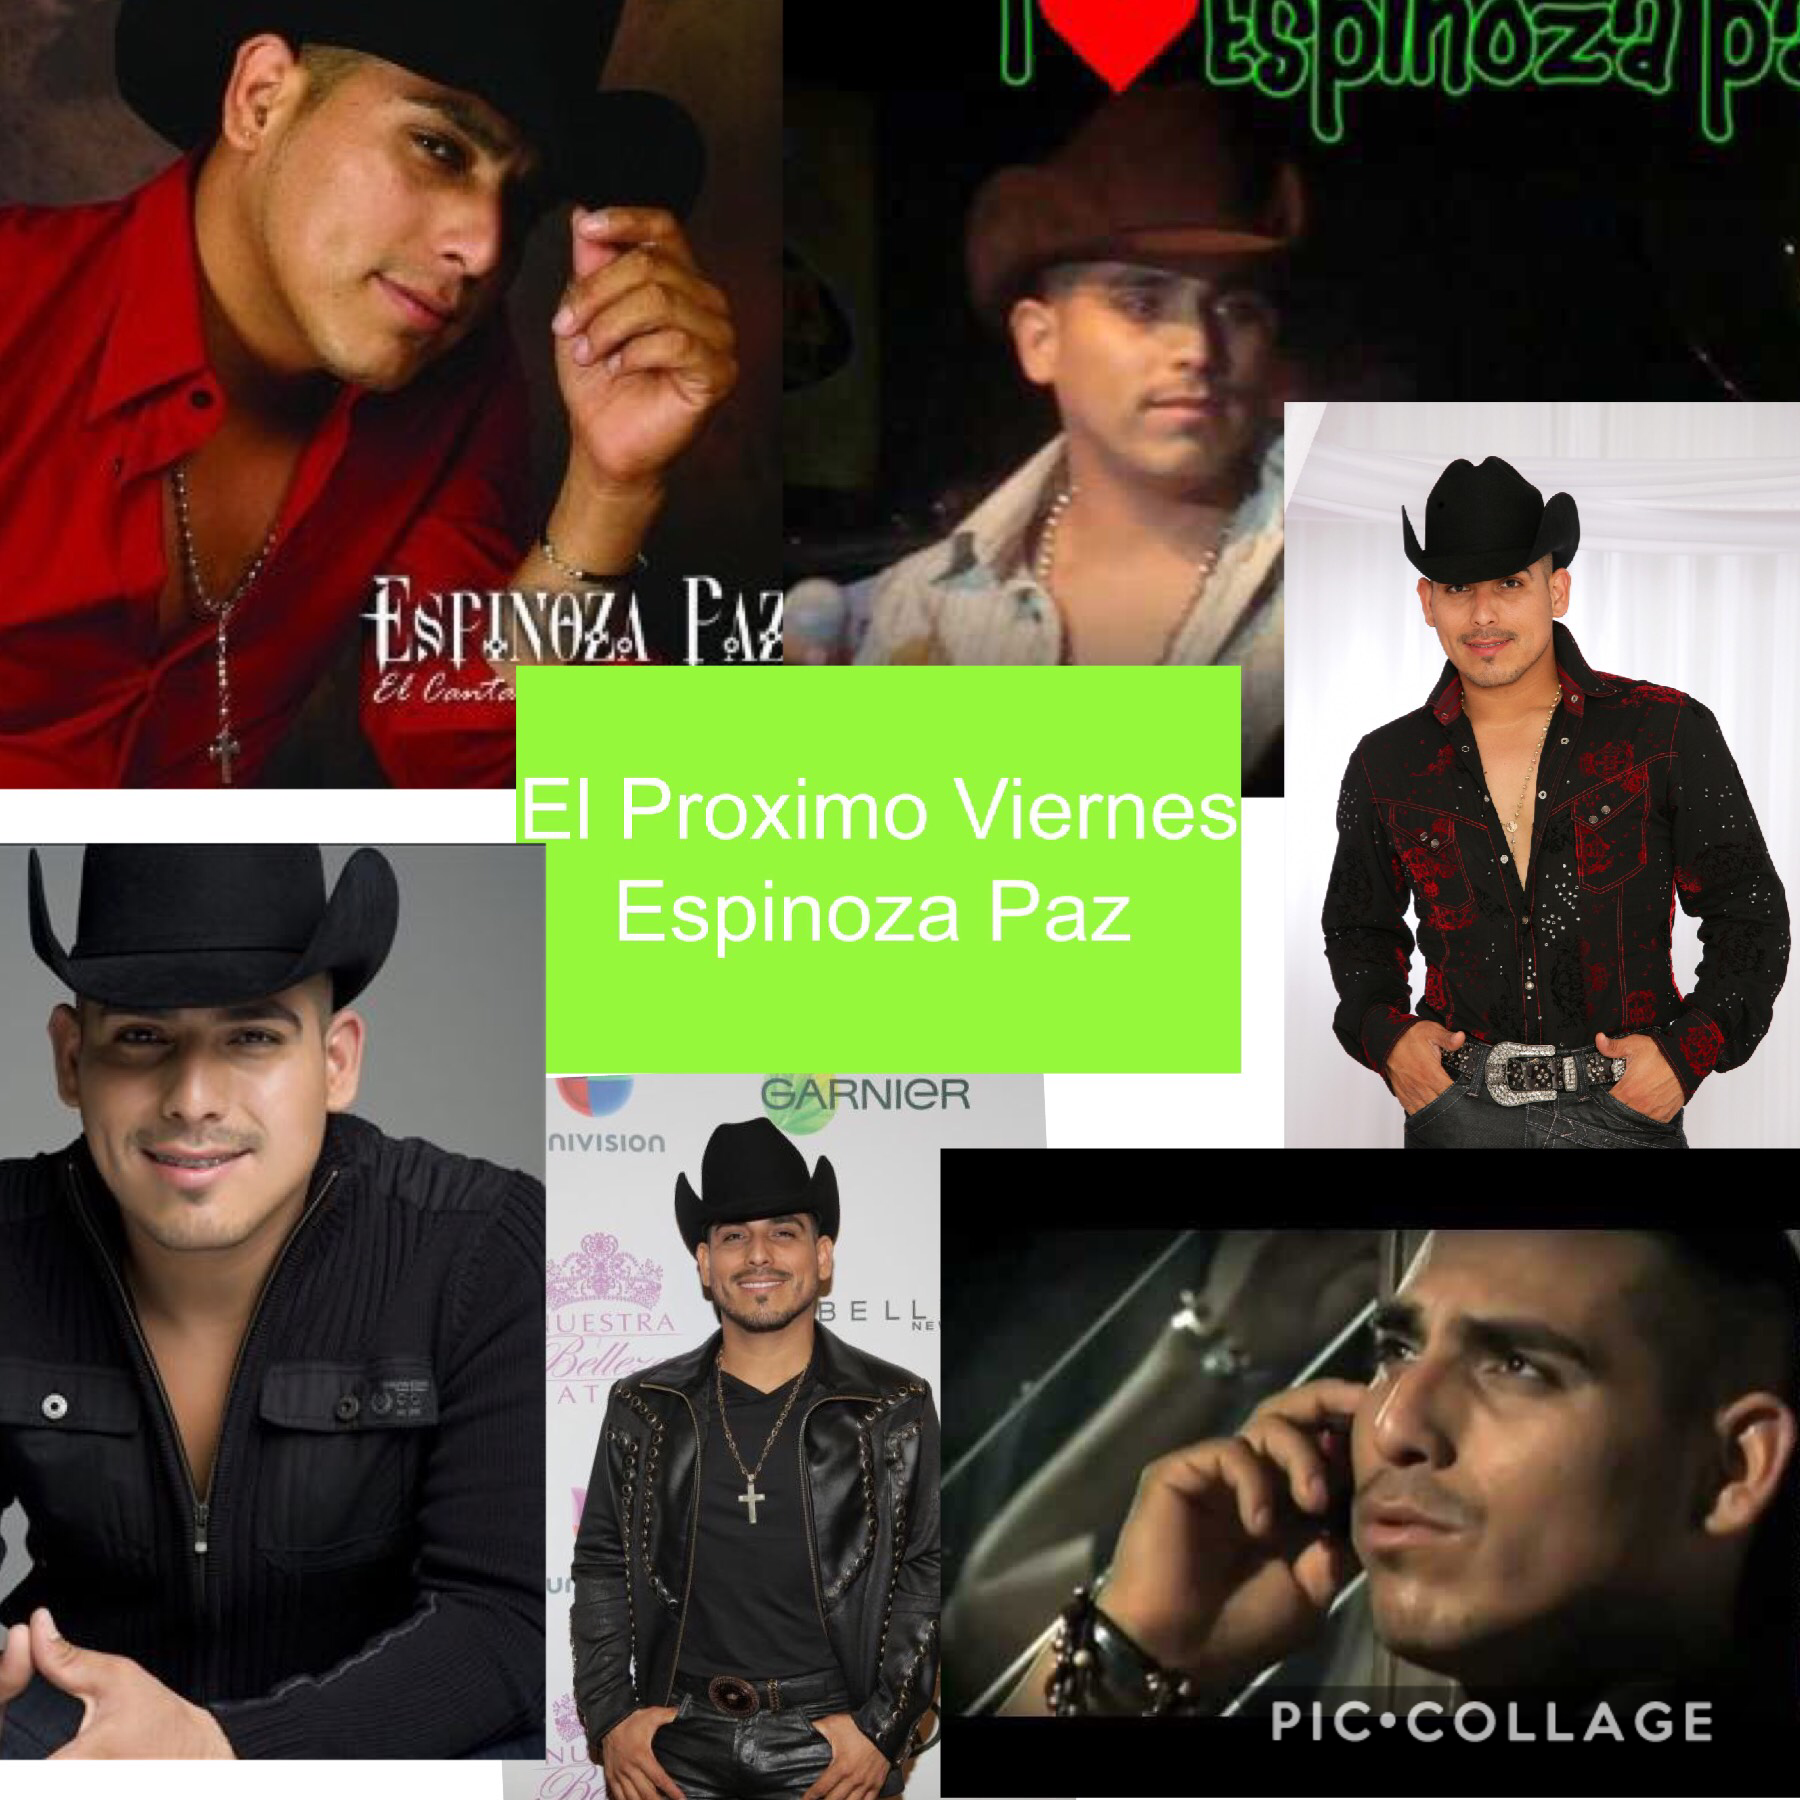 My favorite Mexican singer❤️